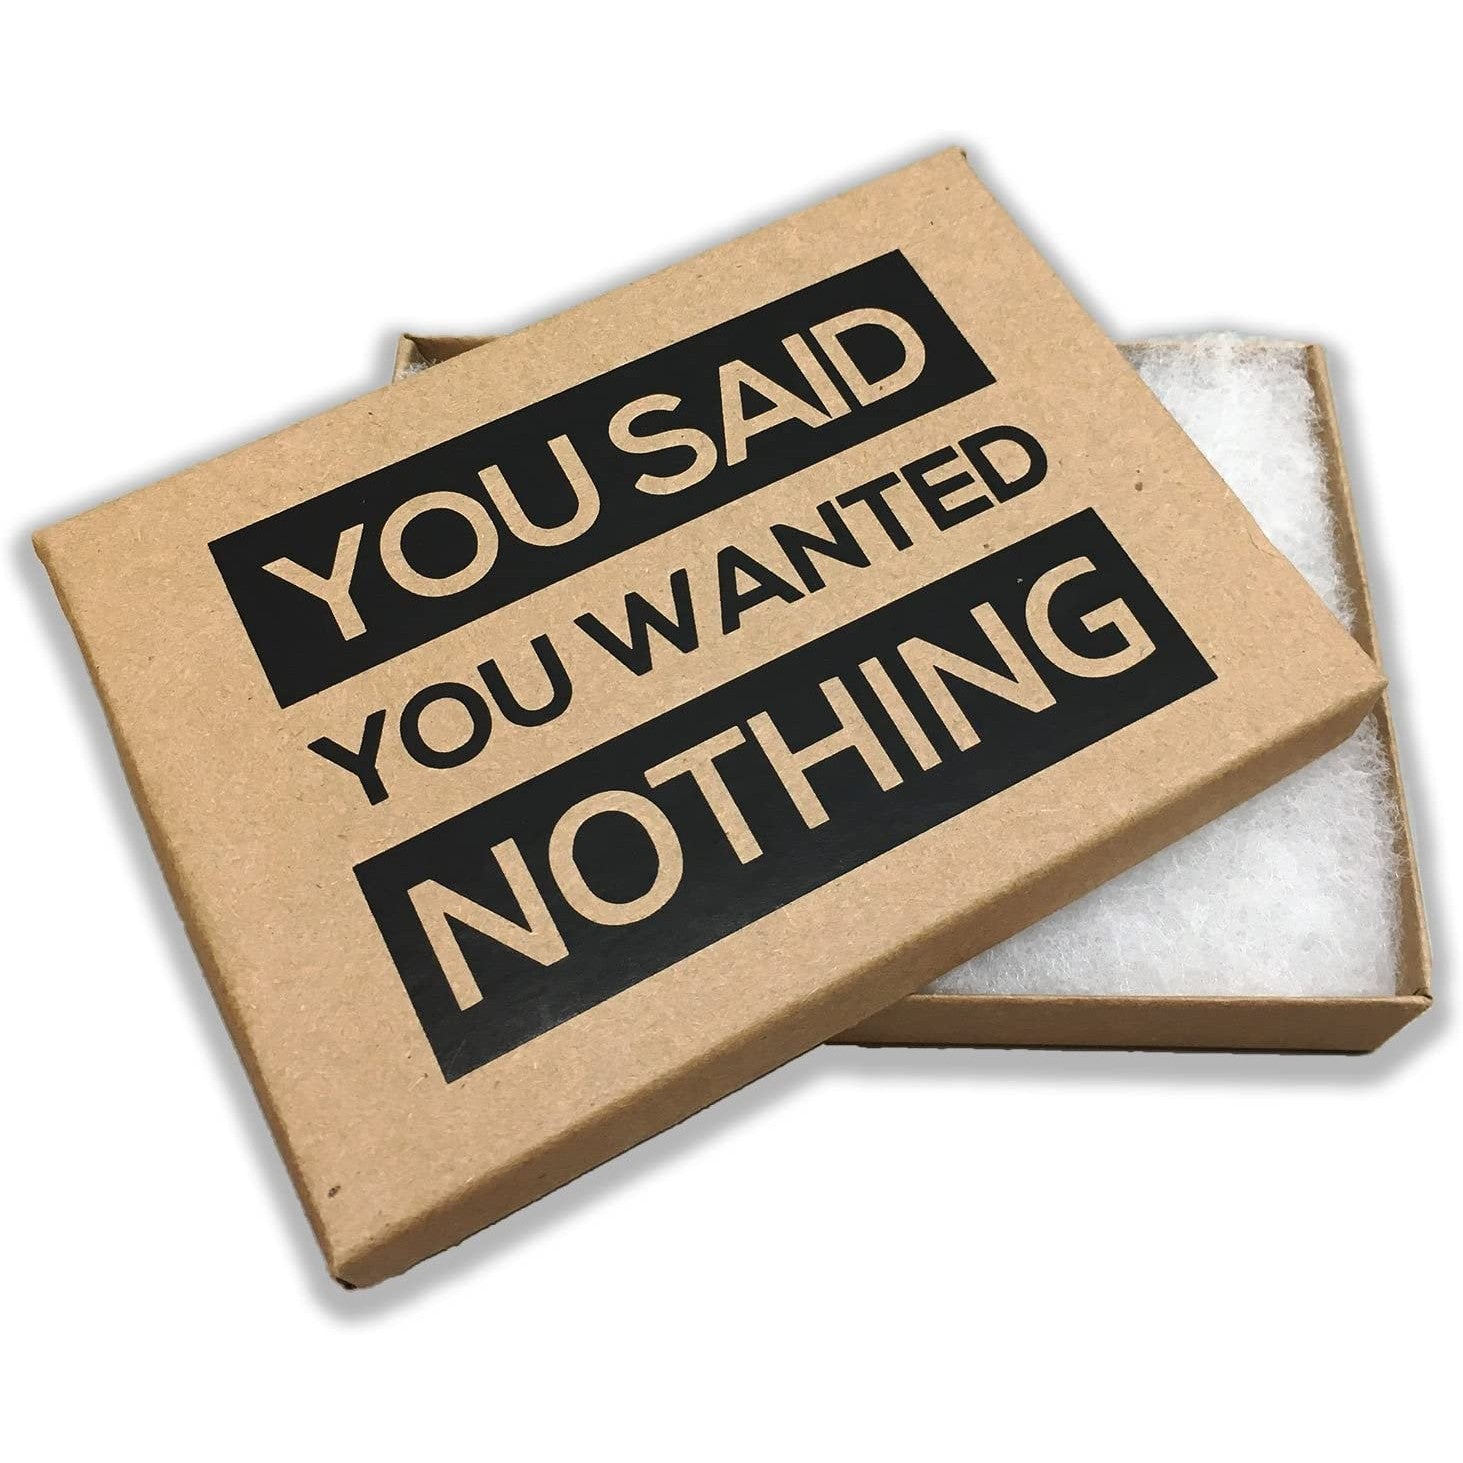 An empty box with a lid. The lid has text all in caps which says, 'You Said You Wanted Nothing.' This is a gag gift idea for the person who always says they want nothing.